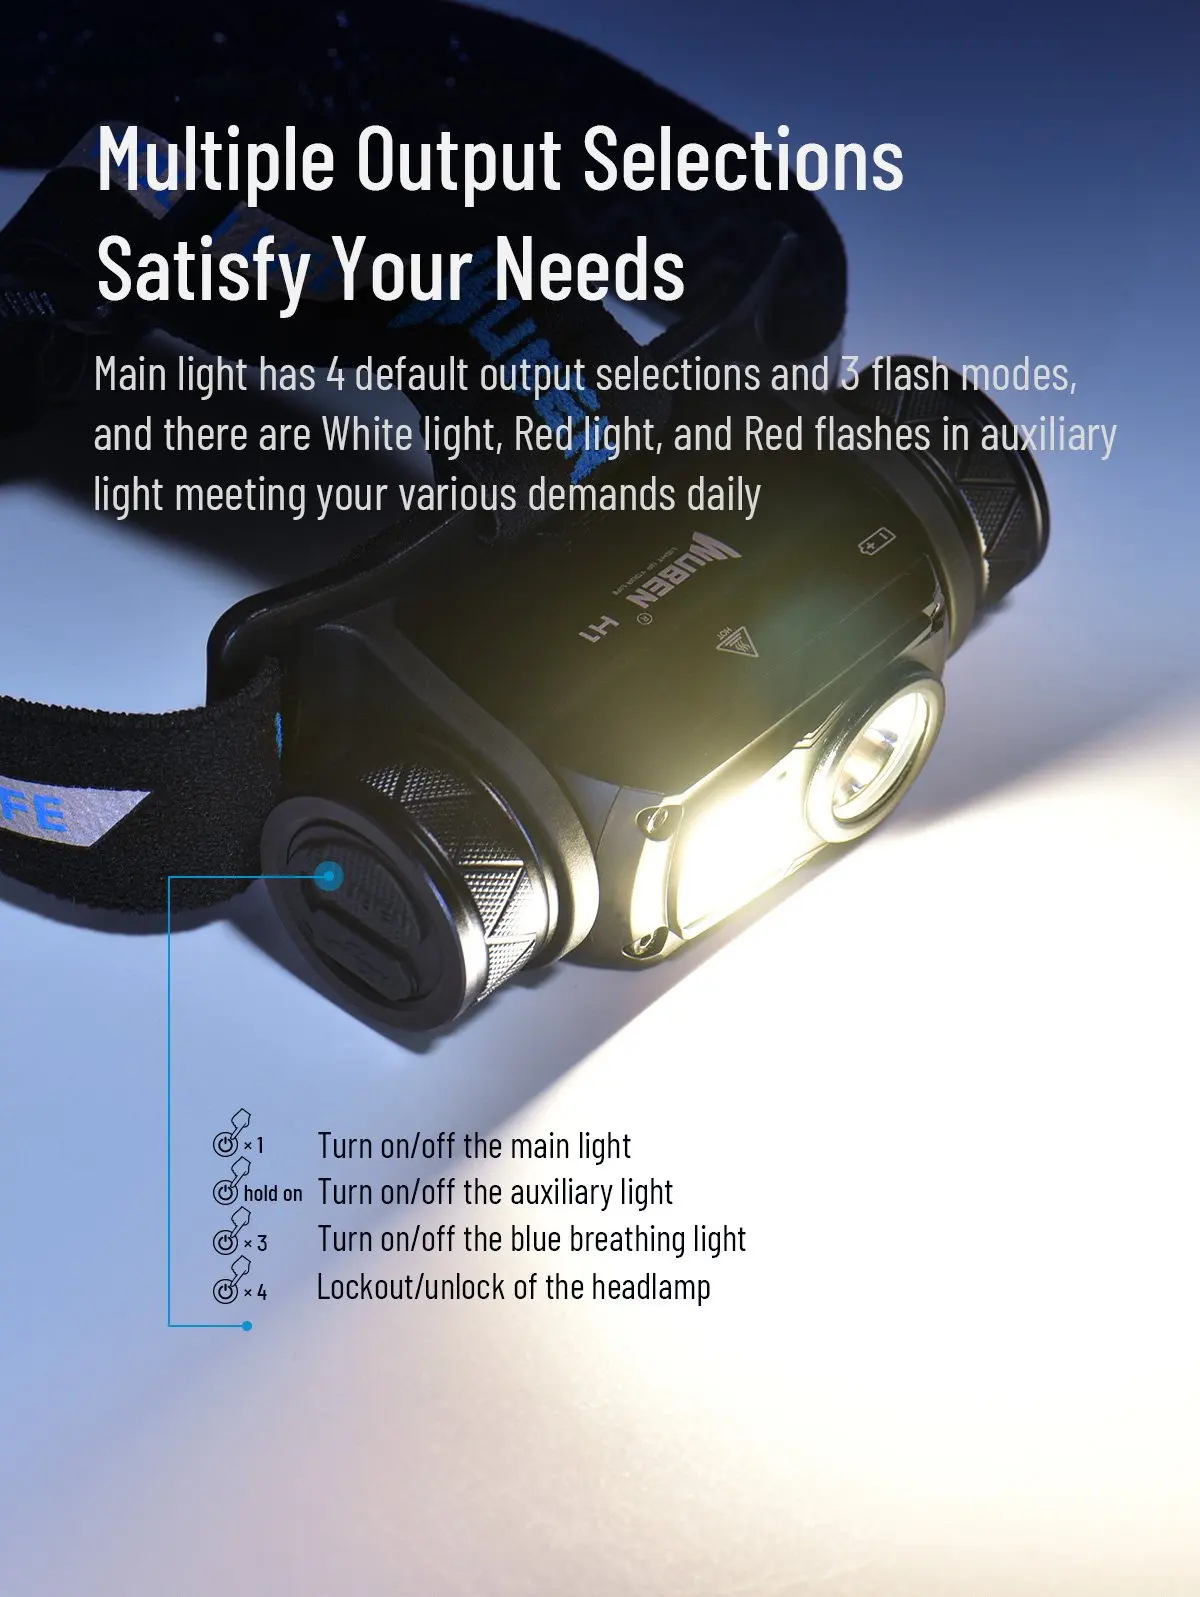 WUBEN H1 LED Headlamp USB Rechargeable Flashlight 1200 lumens 10 Modes IP68 Waterproof Head Lamp for Outdoor Camping Running usb rechargeable torch